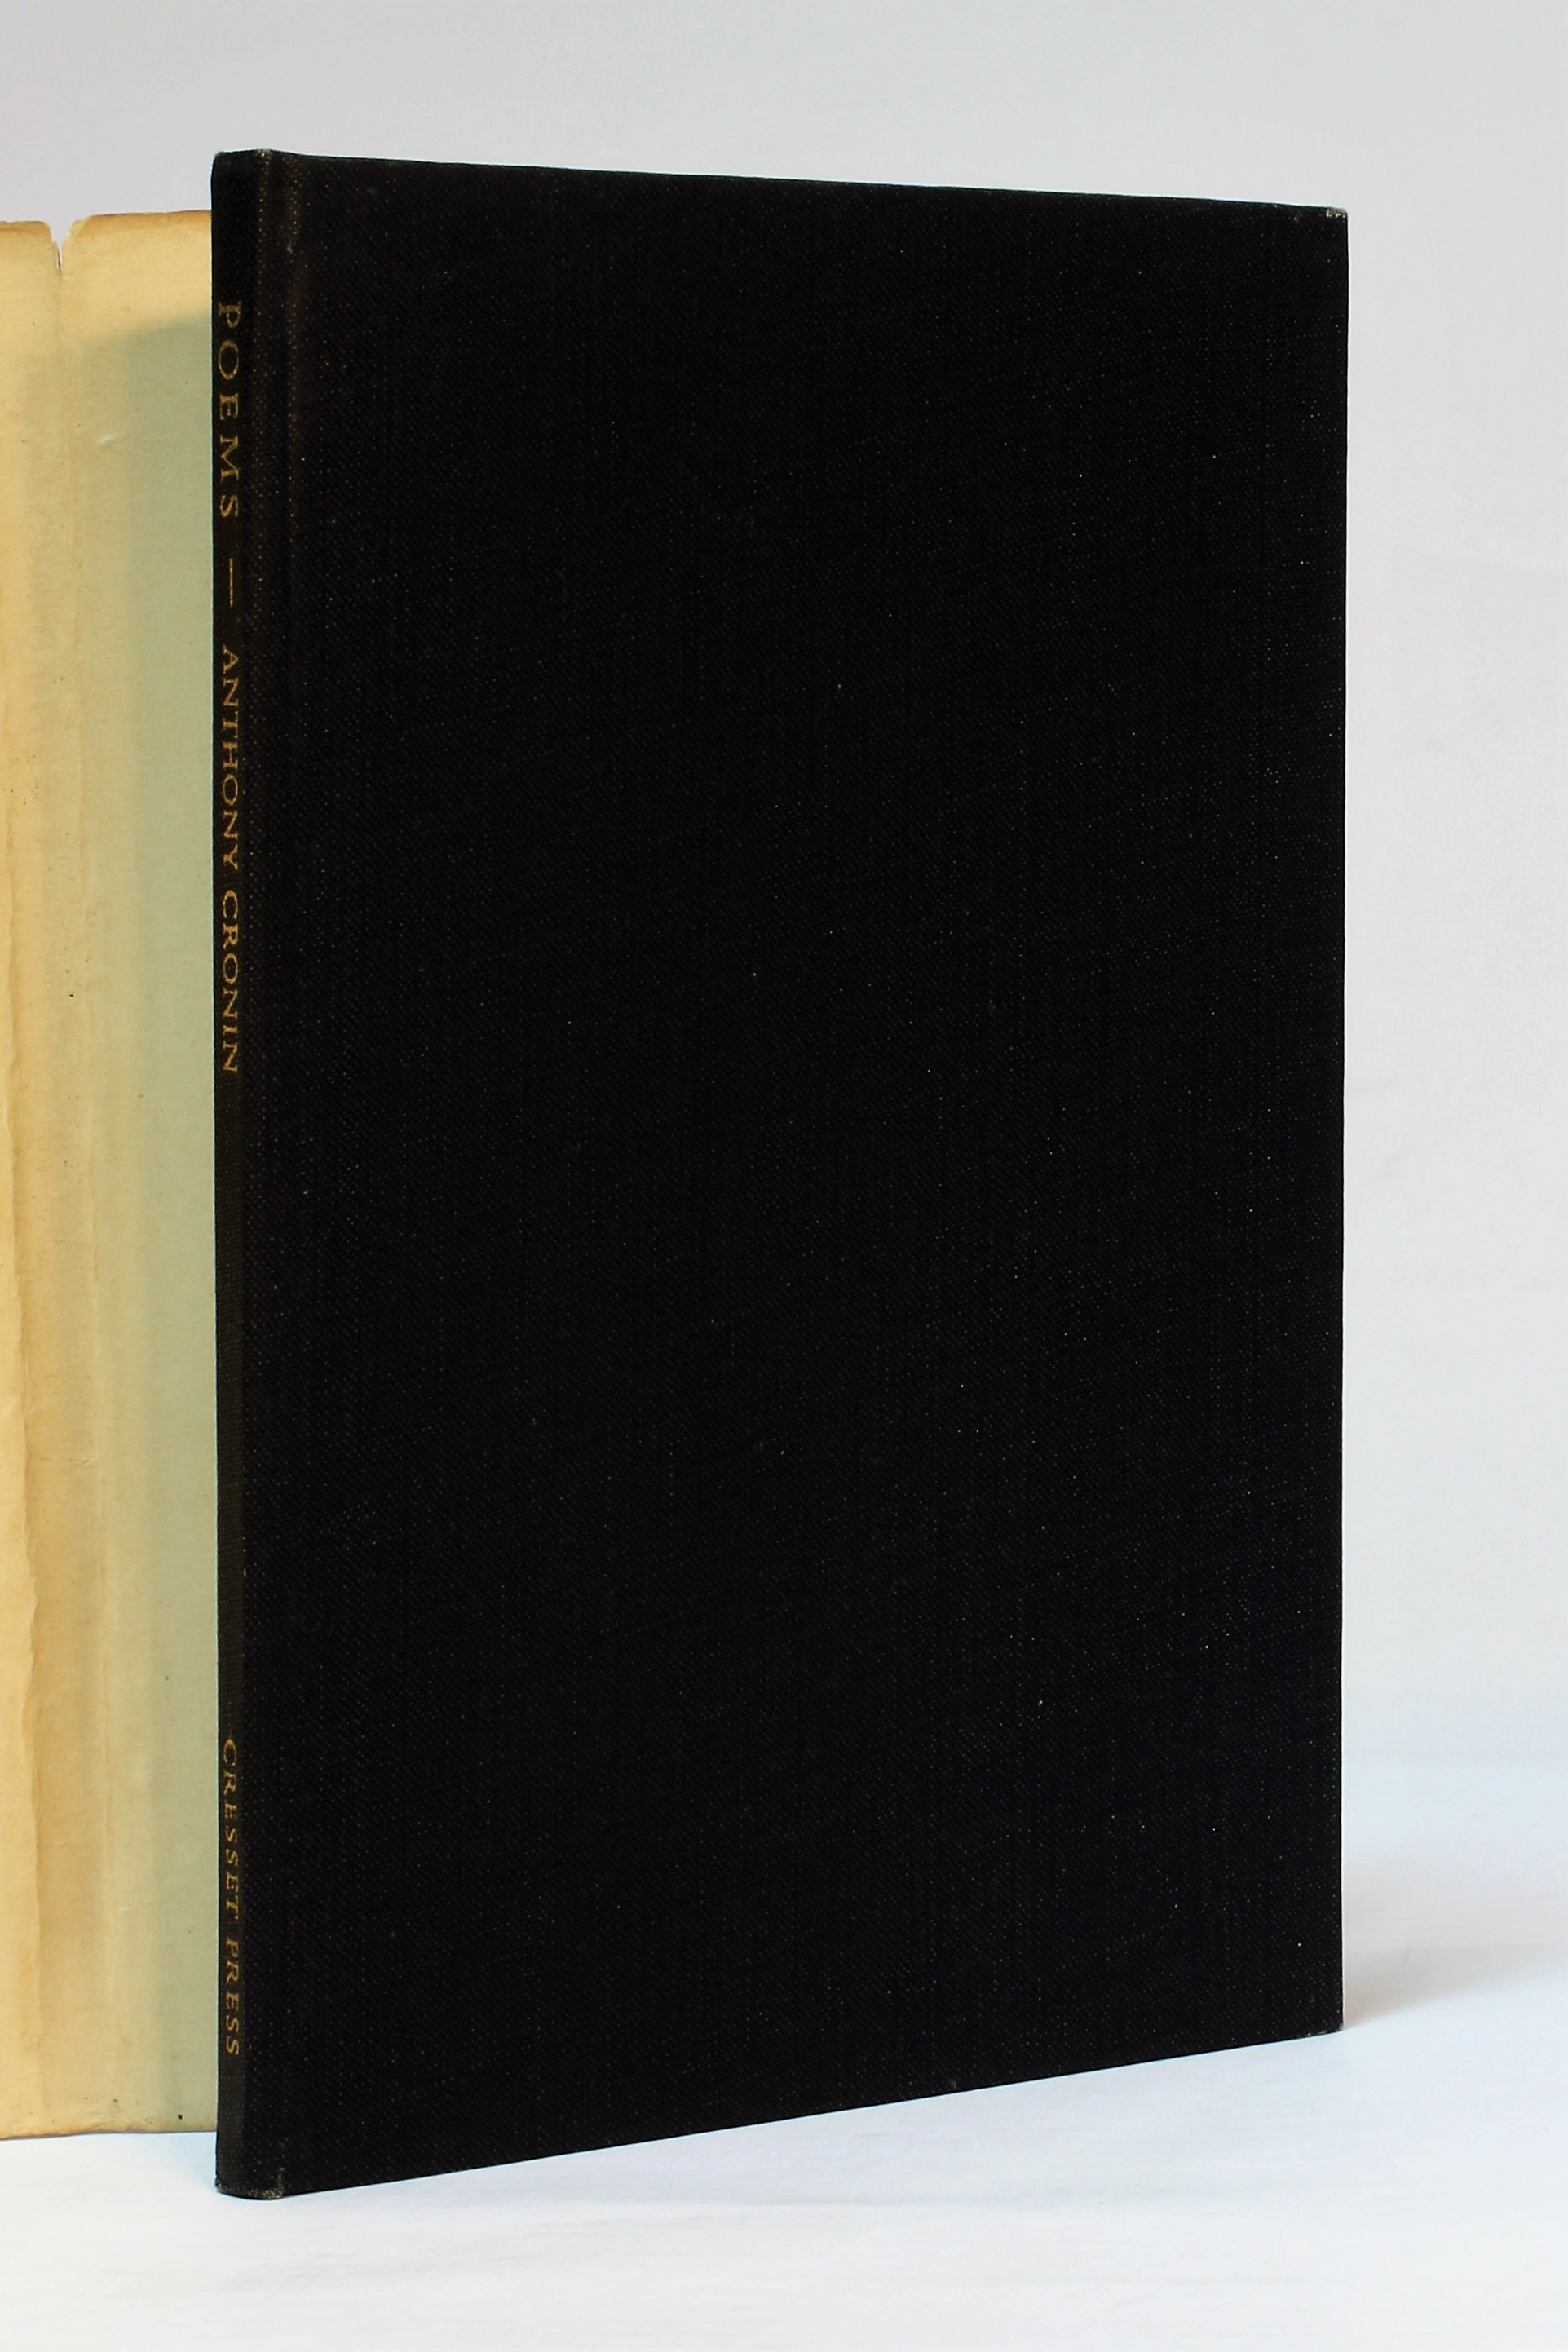 Poems by Cronin, Anthony: Very Good Hardback (1957) First edition ...